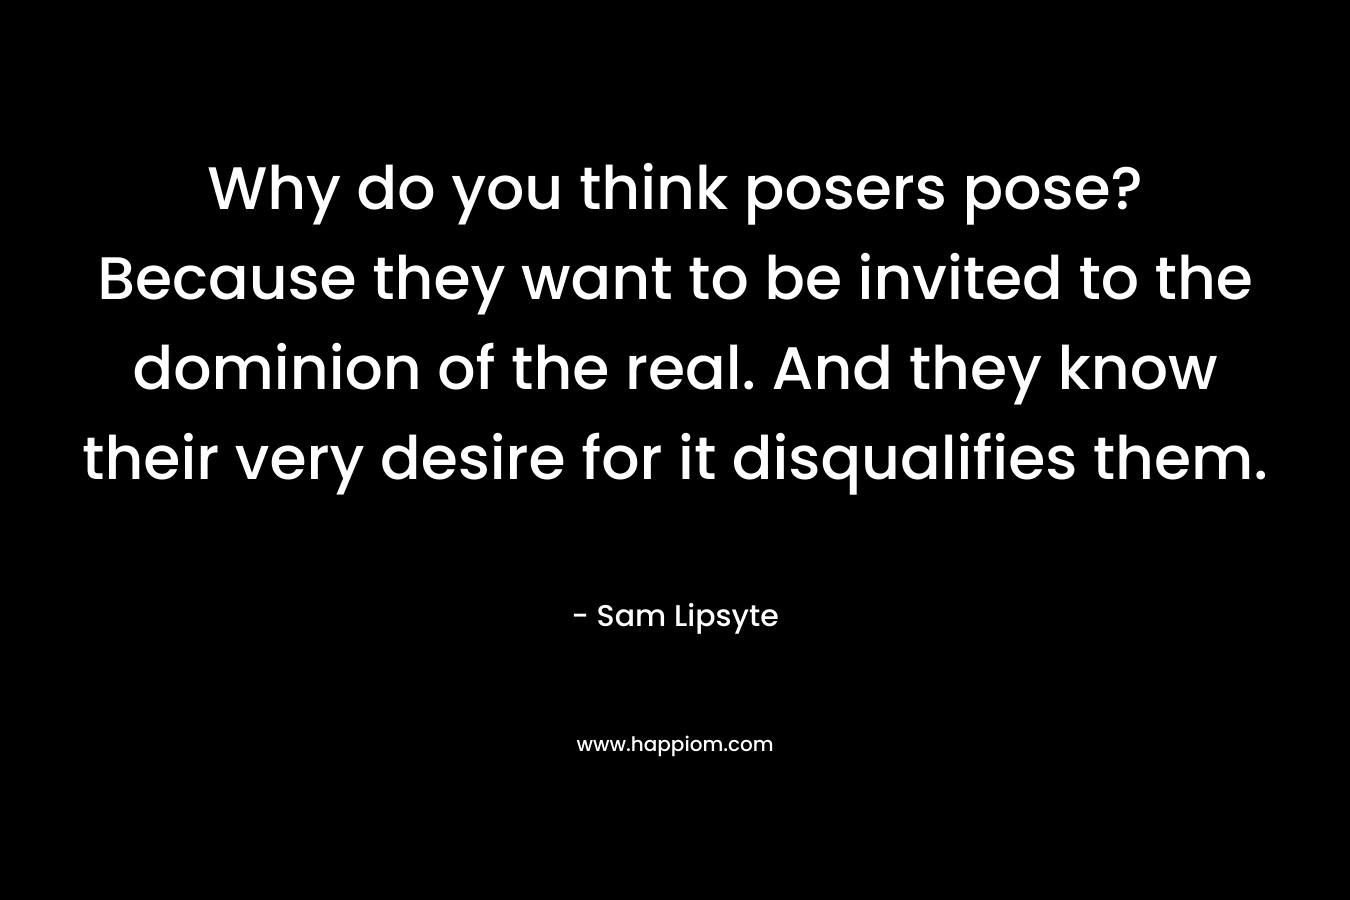 Why do you think posers pose? Because they want to be invited to the dominion of the real. And they know their very desire for it disqualifies them. – Sam Lipsyte